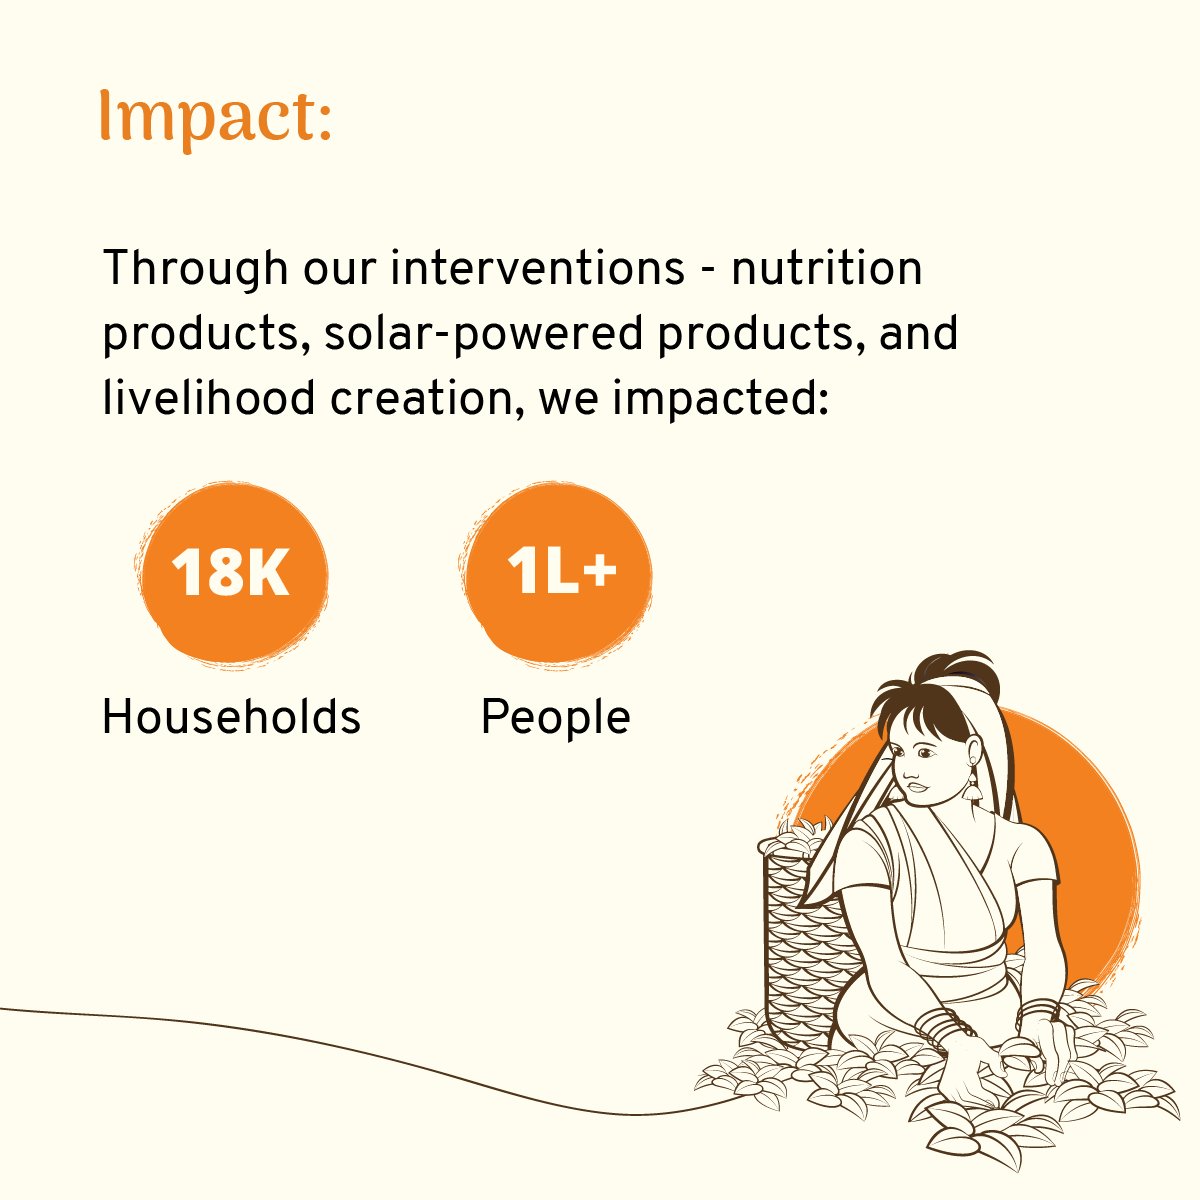 Dharma Life's Food. Family. Future. initiative is in collaboration with @GAINalliance @Unilever @EthicalTea

#FoodFamilyFutures #Nutrition #Assam #India #TeaEstates #Women #Rural #WomenRaising #RisingTogether